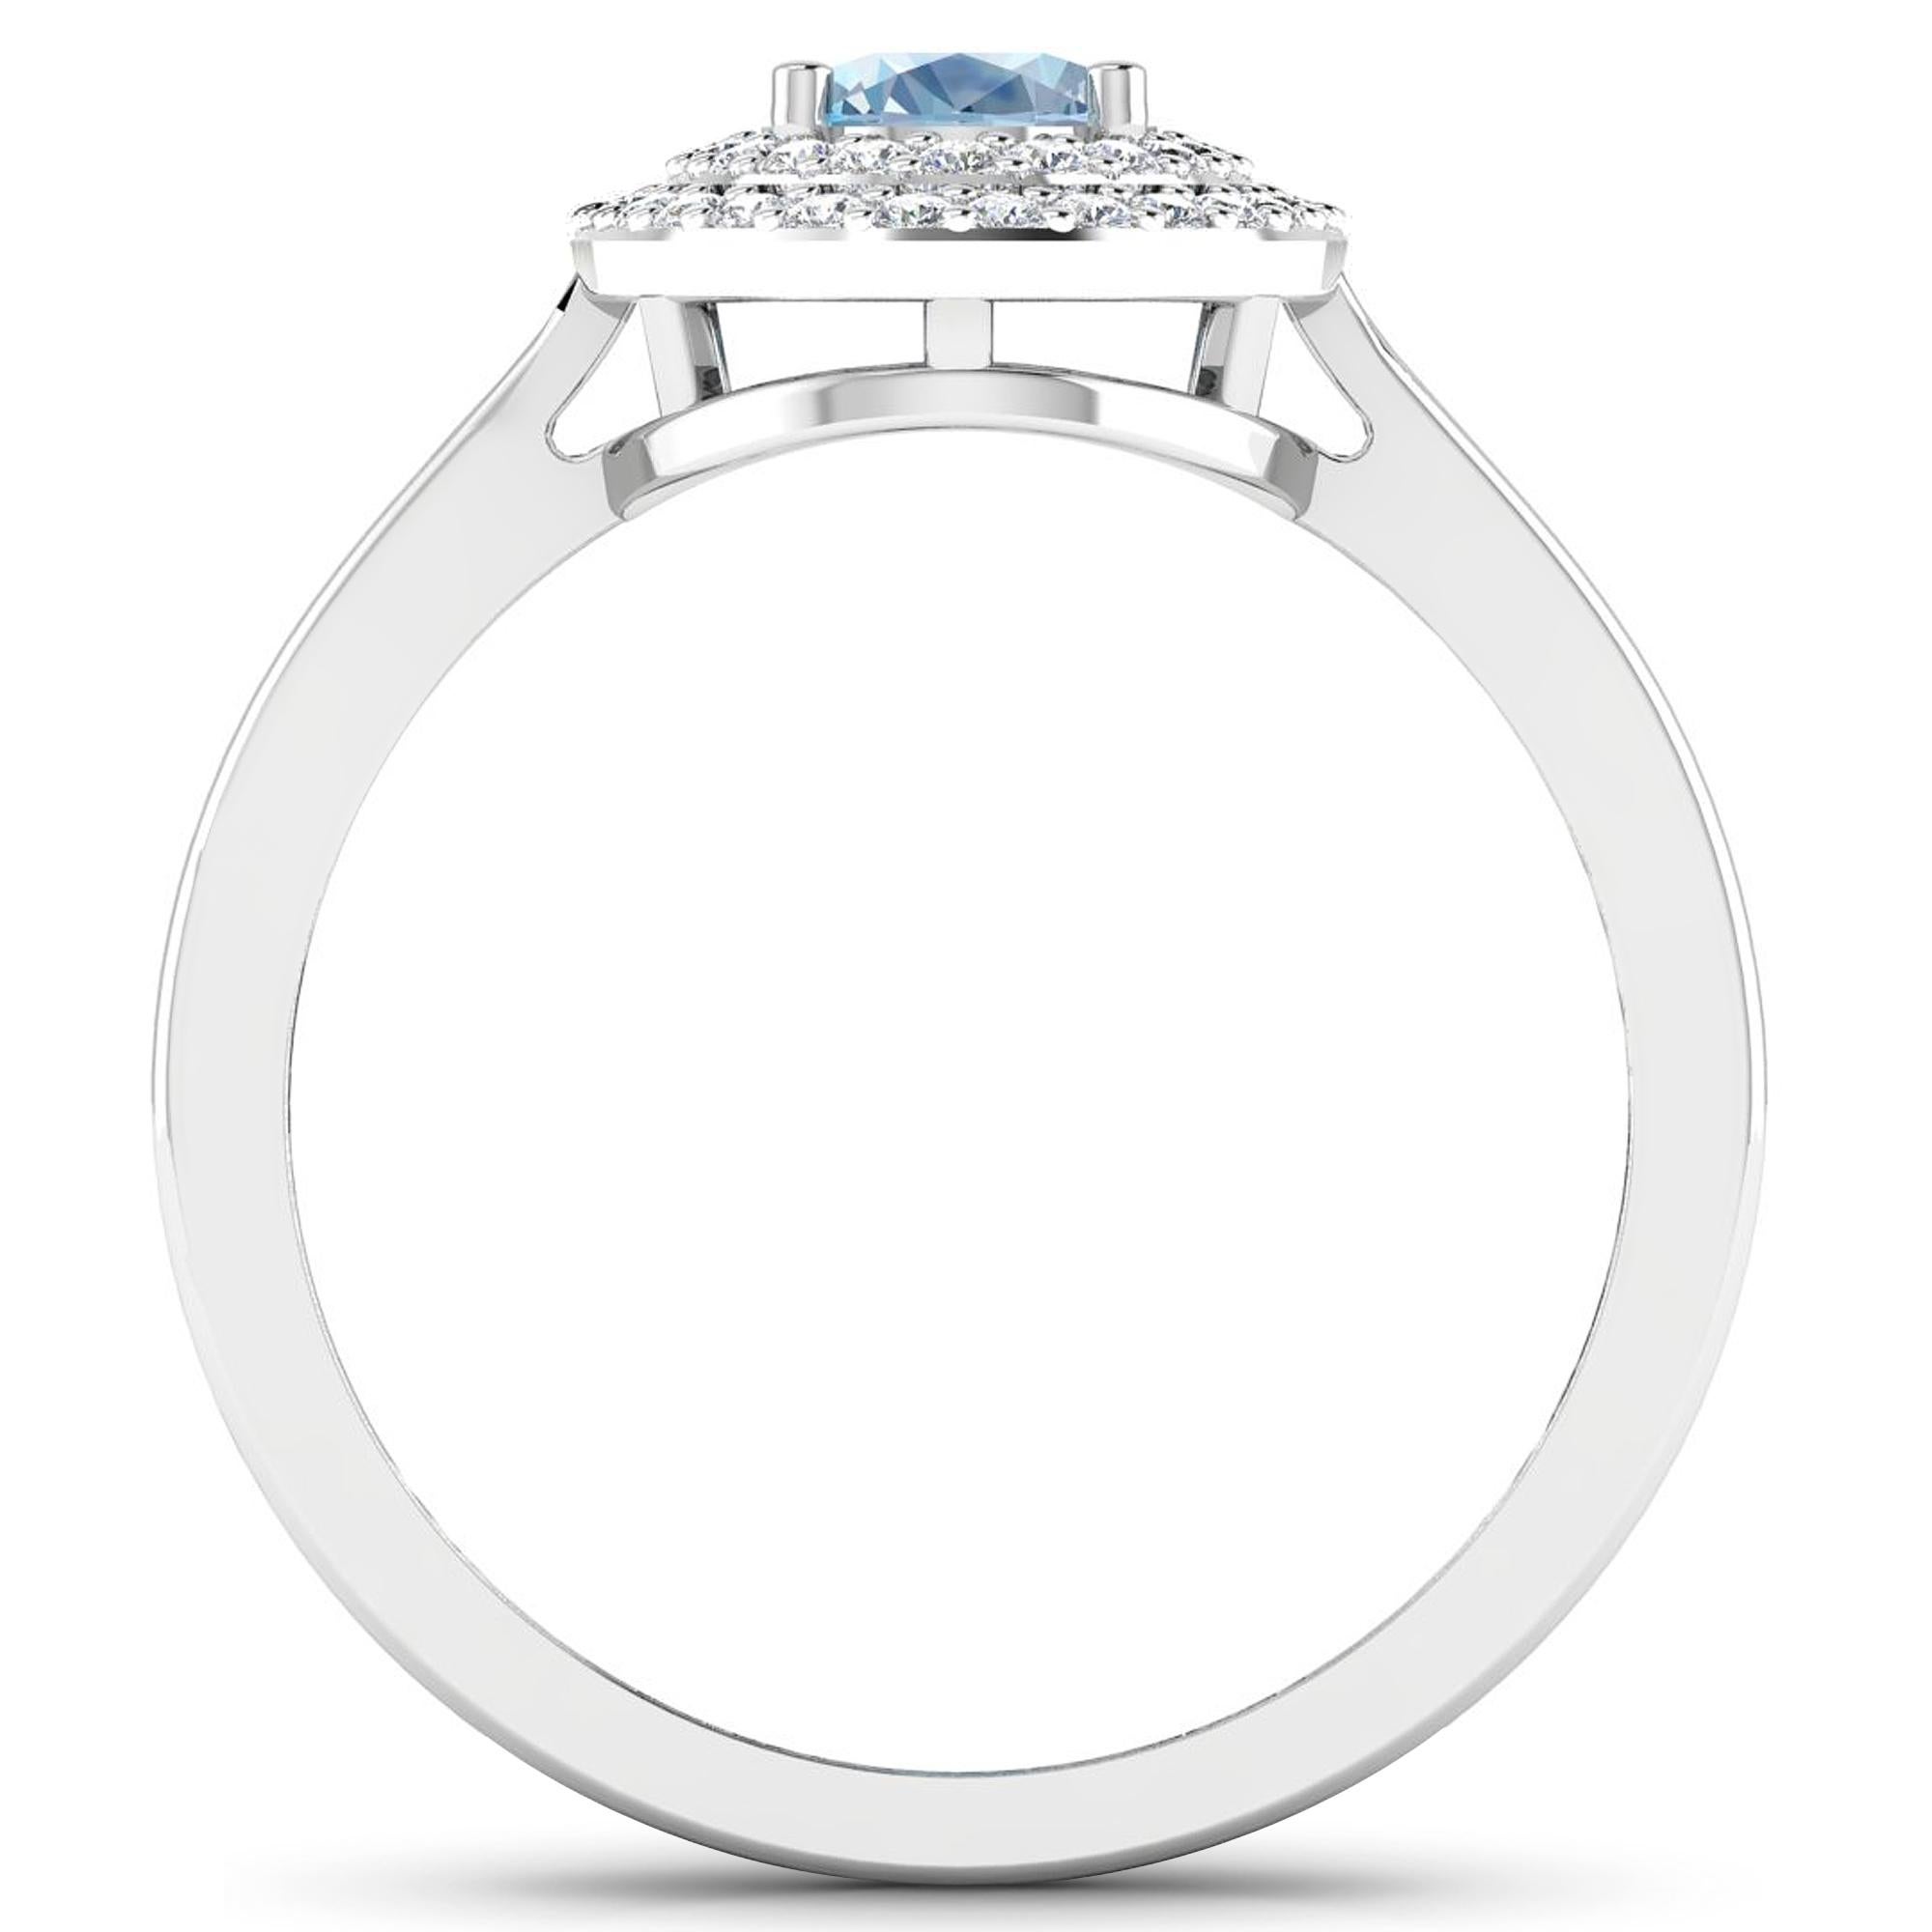 Aquamarine Gold Ring, 14Kt Gold Aquamarine & Diamond Engagement Ring, 0.76ctw.

Flaunt yourself with this 14K White Gold Aquamarine & White Diamond Engagement Ring. The setting is inlaid with 46 accented full-cut White Diamond round stones for a